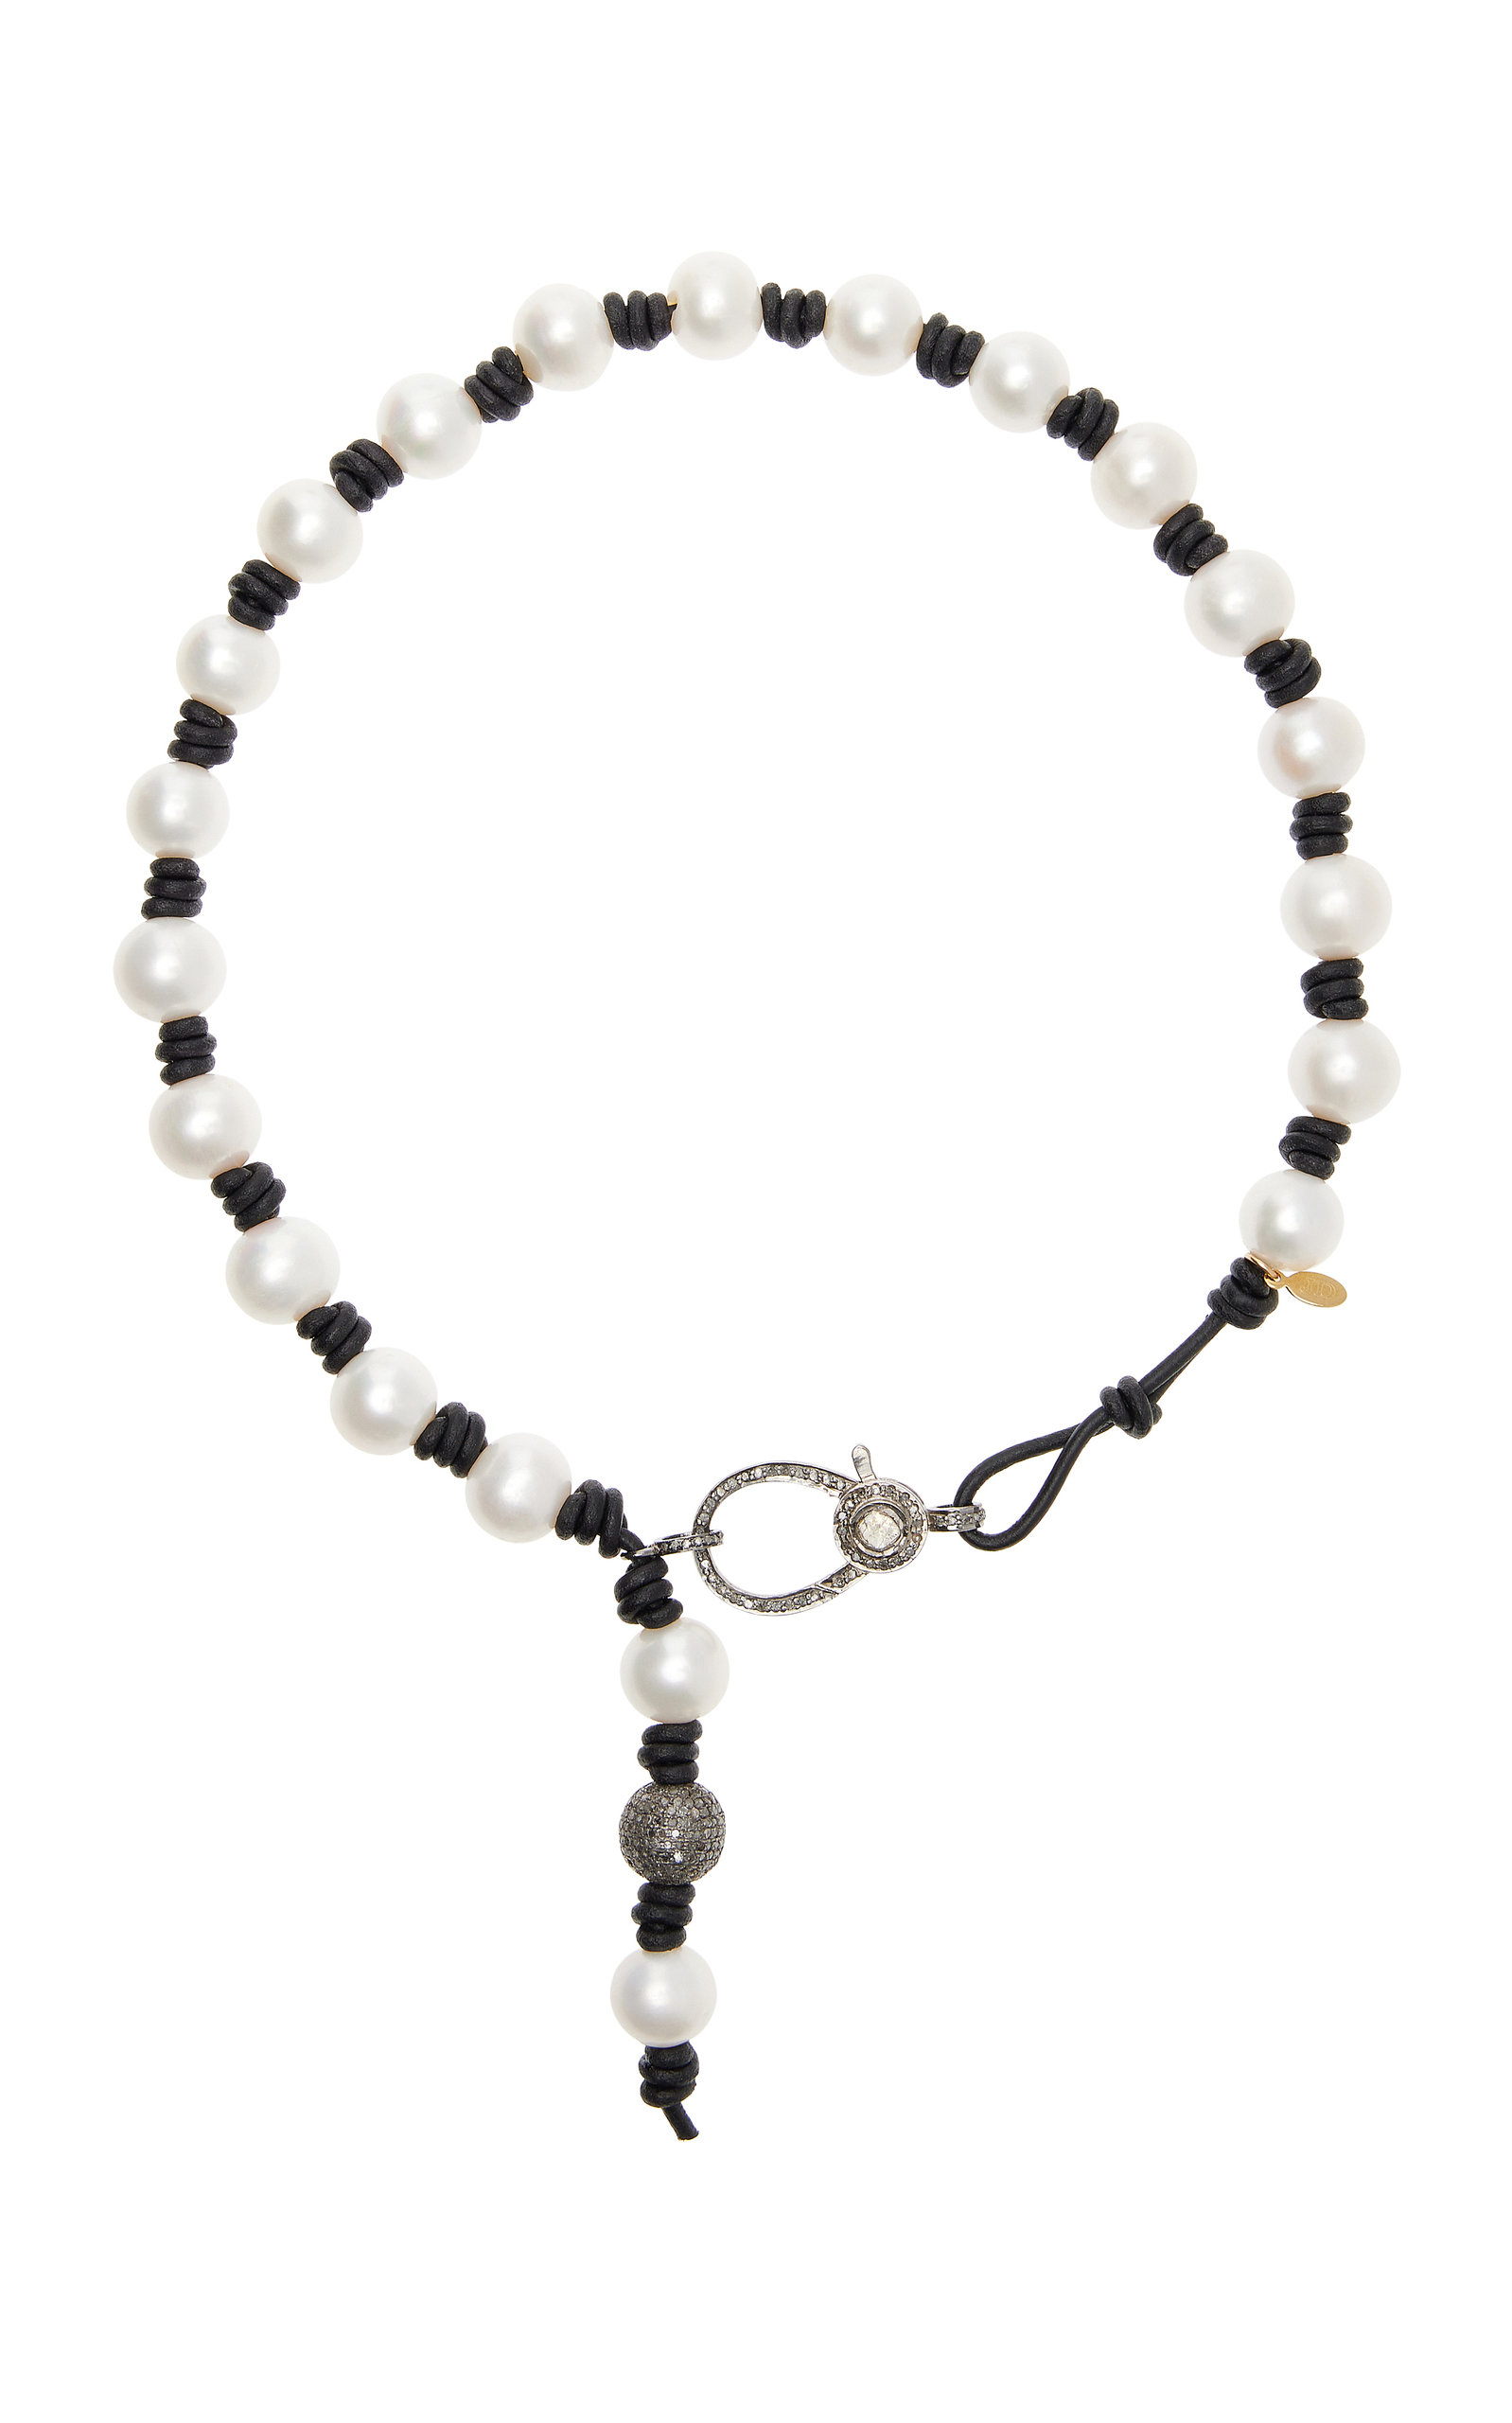 Joie DiGiovanni Women's Pearl and Leather Necklace